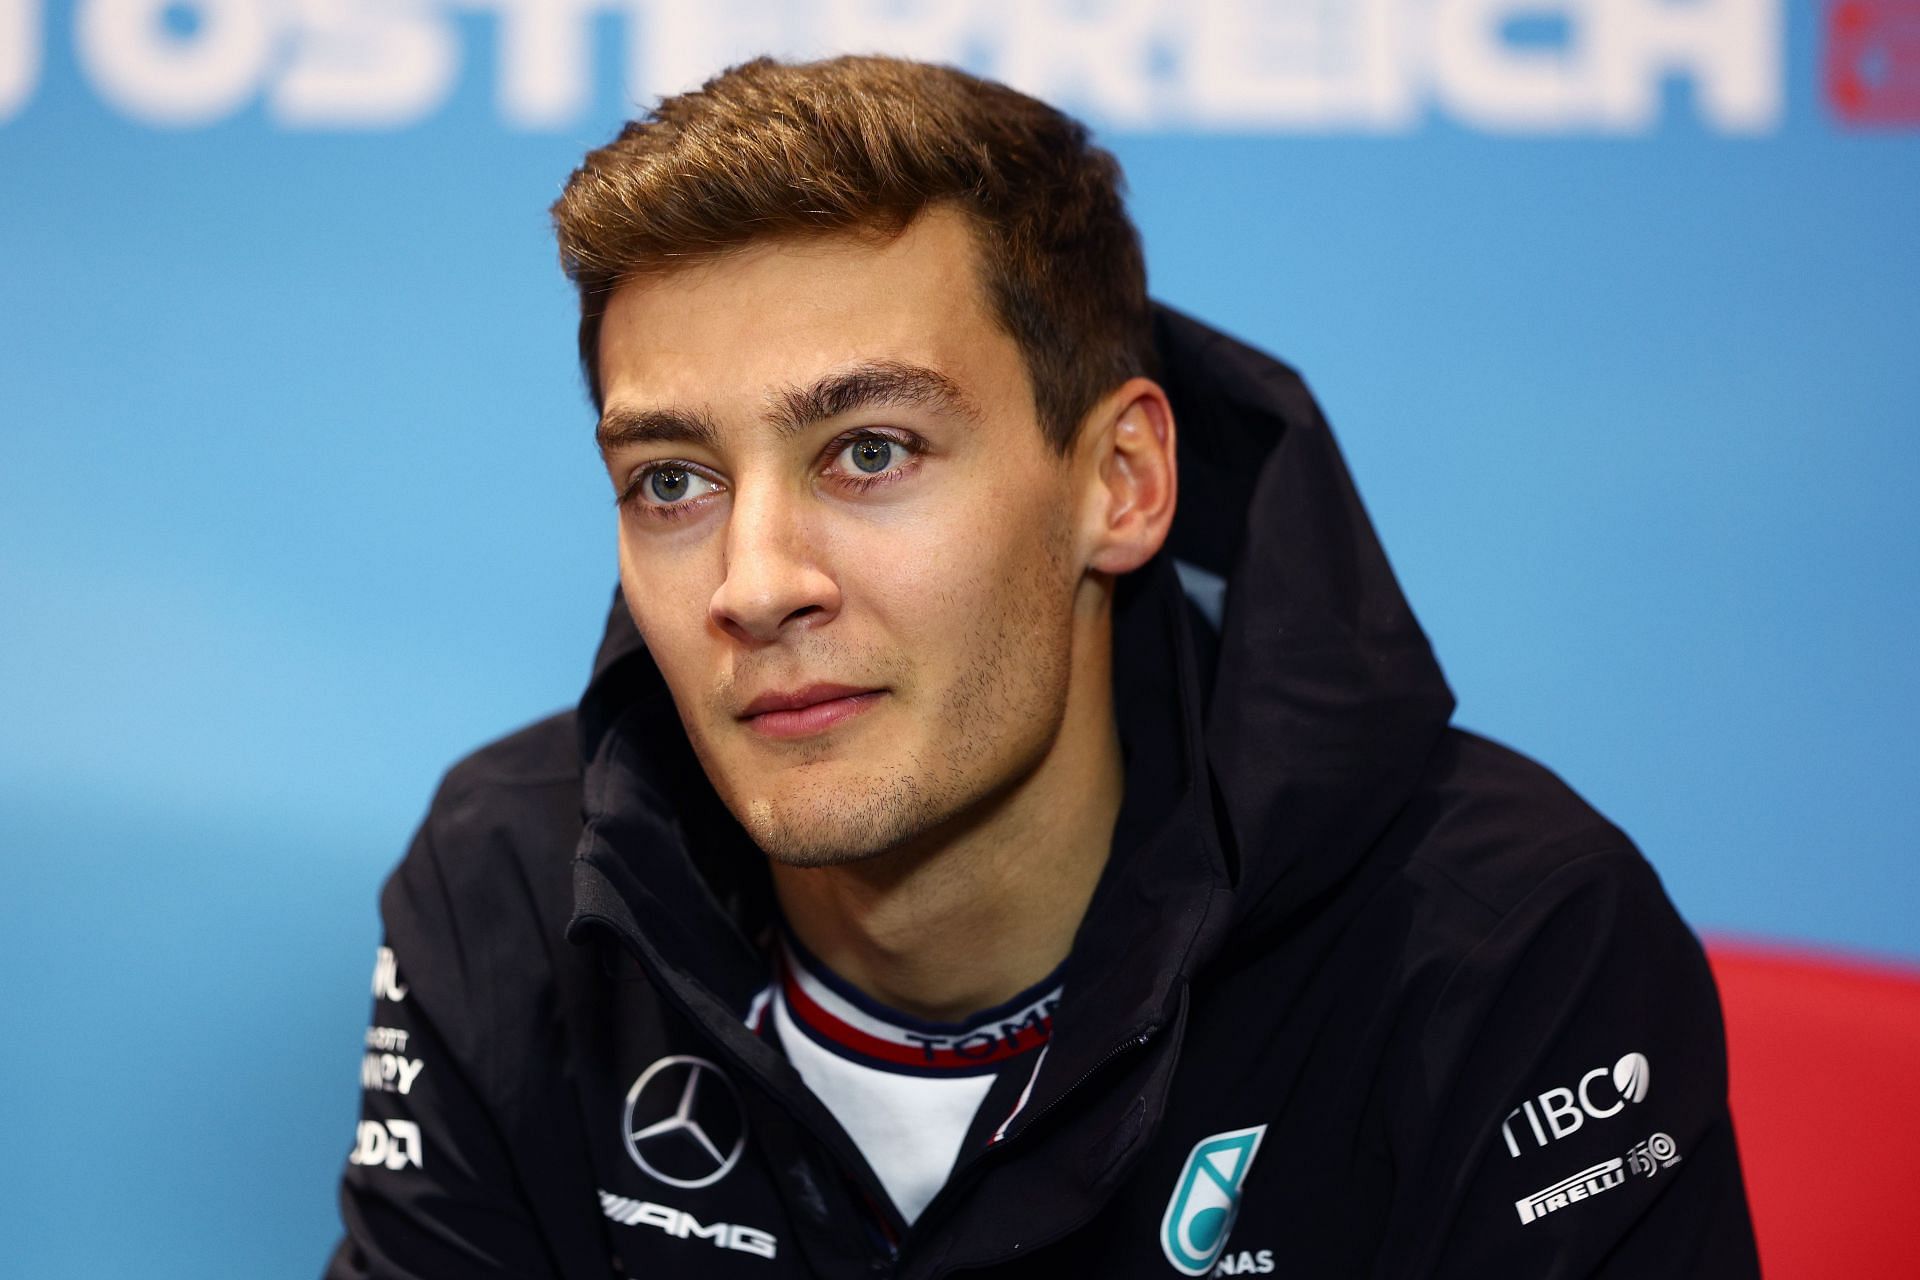 George Russell was &ldquo;surprised&rdquo; by Mercedes boss Toto Wolff&rsquo;s driving skills.